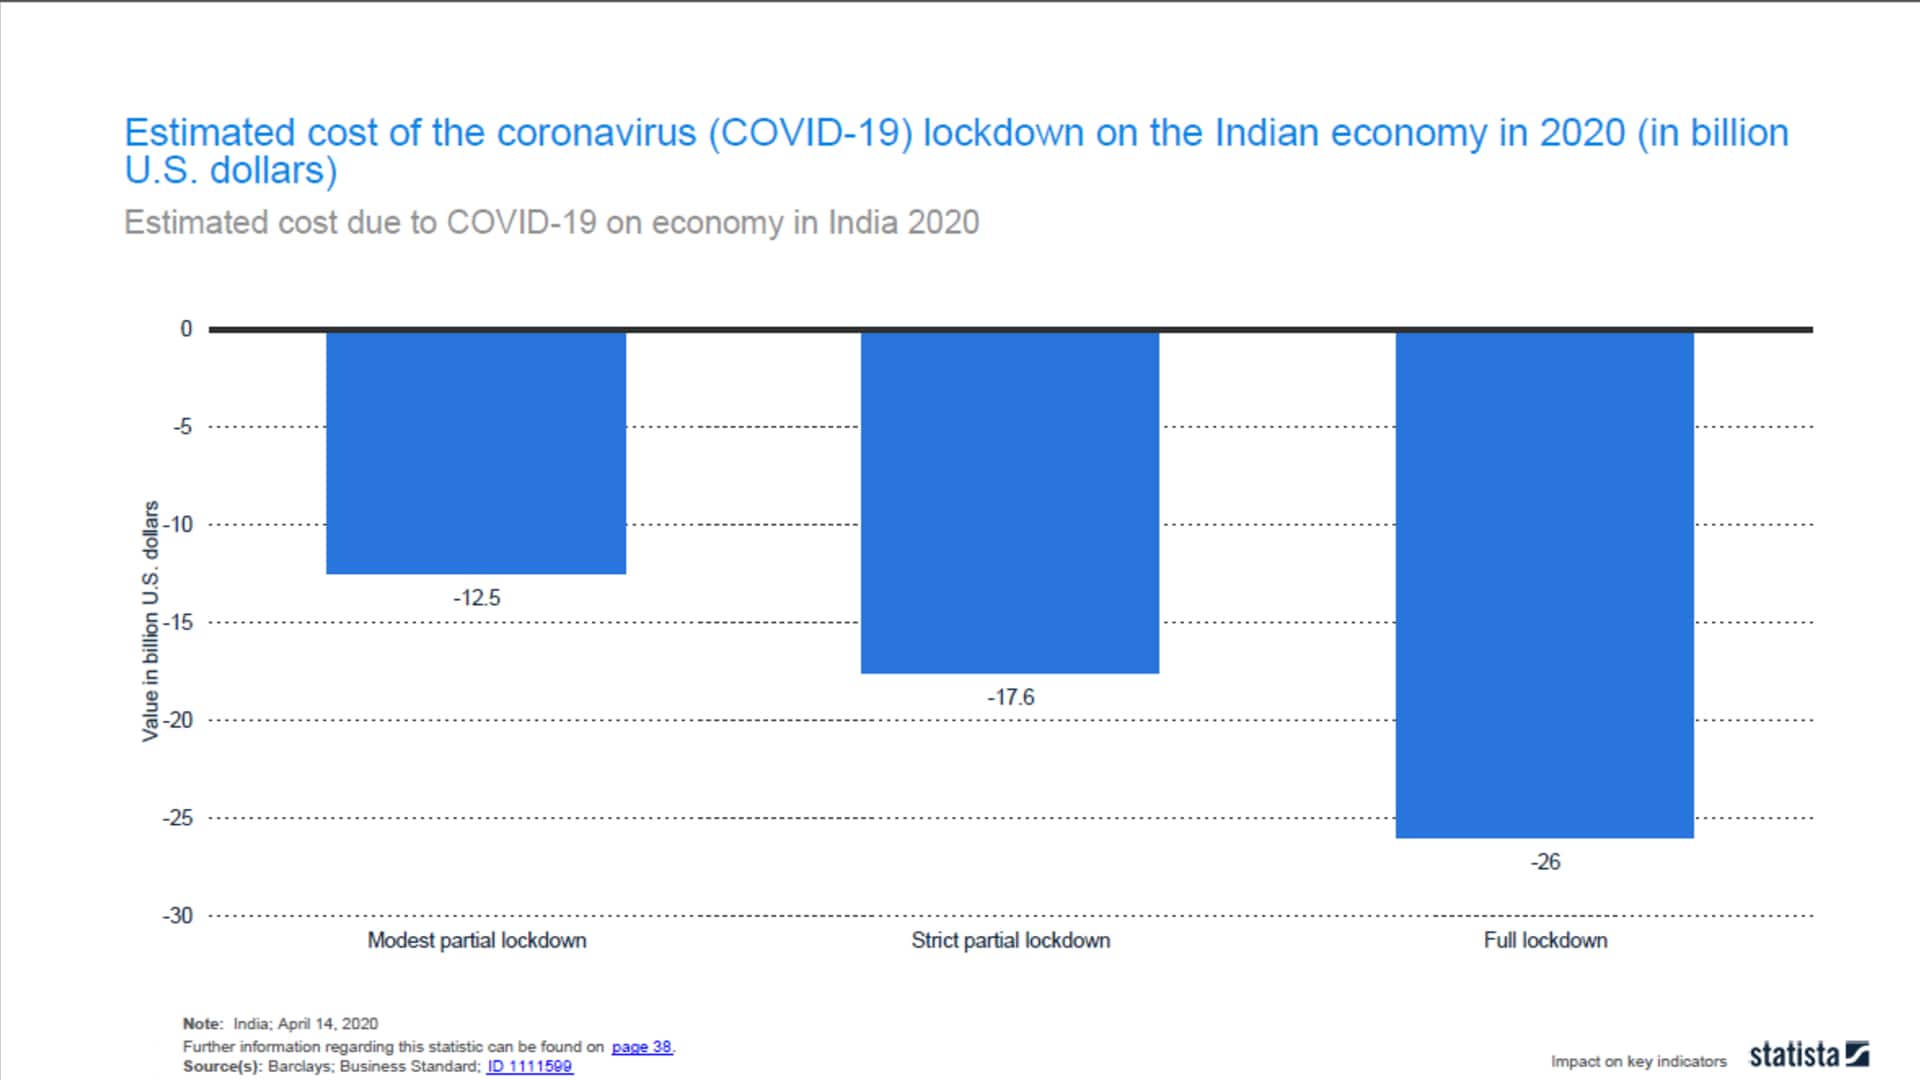 Estimated cost of the coronavirus (COVID-19) lockdown on the Indian economy in 2020 (in billion U.S. dollars): The coronavirus (COVID-19) had been at the centre of the loss of lives and livelihood on a massive scale. In India, the economy alongside the population also requires nursing back to health. The estimated cost of a full lockdown was a whopping 26 billion U.S. dollars. Most of the loss was forecast to occur in the June quarter. Setback on the economy the lockdown came at a time when the economy was already struggling. Trade across sectors was estimated to be impacted. This directly affected the procurement of essential items including testing equipment. Besides the import and export business, yet another major revenue generator that received a blow was the tourism industry. India`s predominantly unorganized retail market was yet another casualty with the lockdown increasing the pressure on the online retail segment to rise to the occasion. However, companies offering digital payment services such as Paytm and Google Pay appeared to have somewhat benefited from the situation. Public healthcare in India While the impact on the economy was one thing, lives were at risk, putting healthcare at the forefront. Access to proper healthcare services was a major concern within India irrespective of the pandemic. As of 2018, public health expenditure was valued at nearly 1.6 trillion Indian rupees. Government health facilities were the more affordable option for a majority of the population. Availability of beds in government hospitals was proportionally higher across urban regions as opposed to rural areas. The government had increased and allocated several government and private testing laboratories to combat the virus. (Graph: CRISIL)